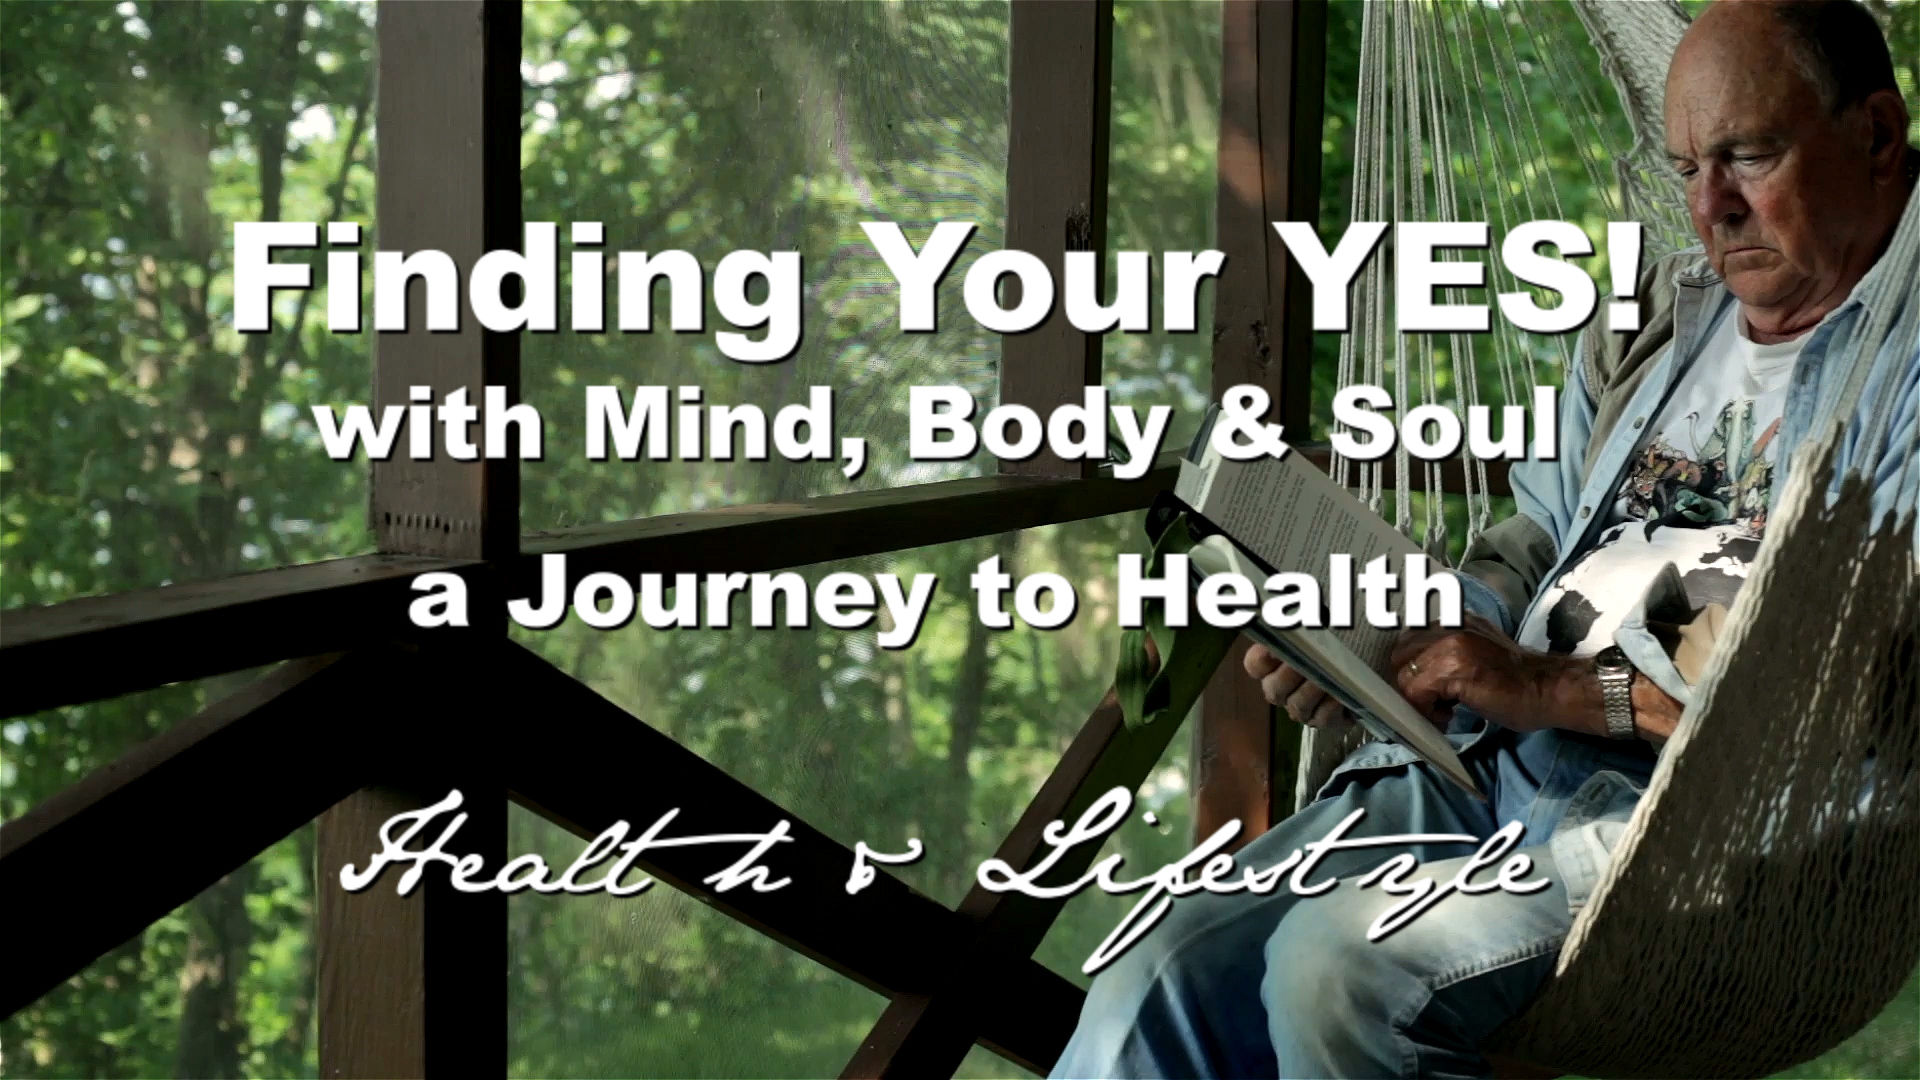 Finding Your YES! "Health & Lifestyle"